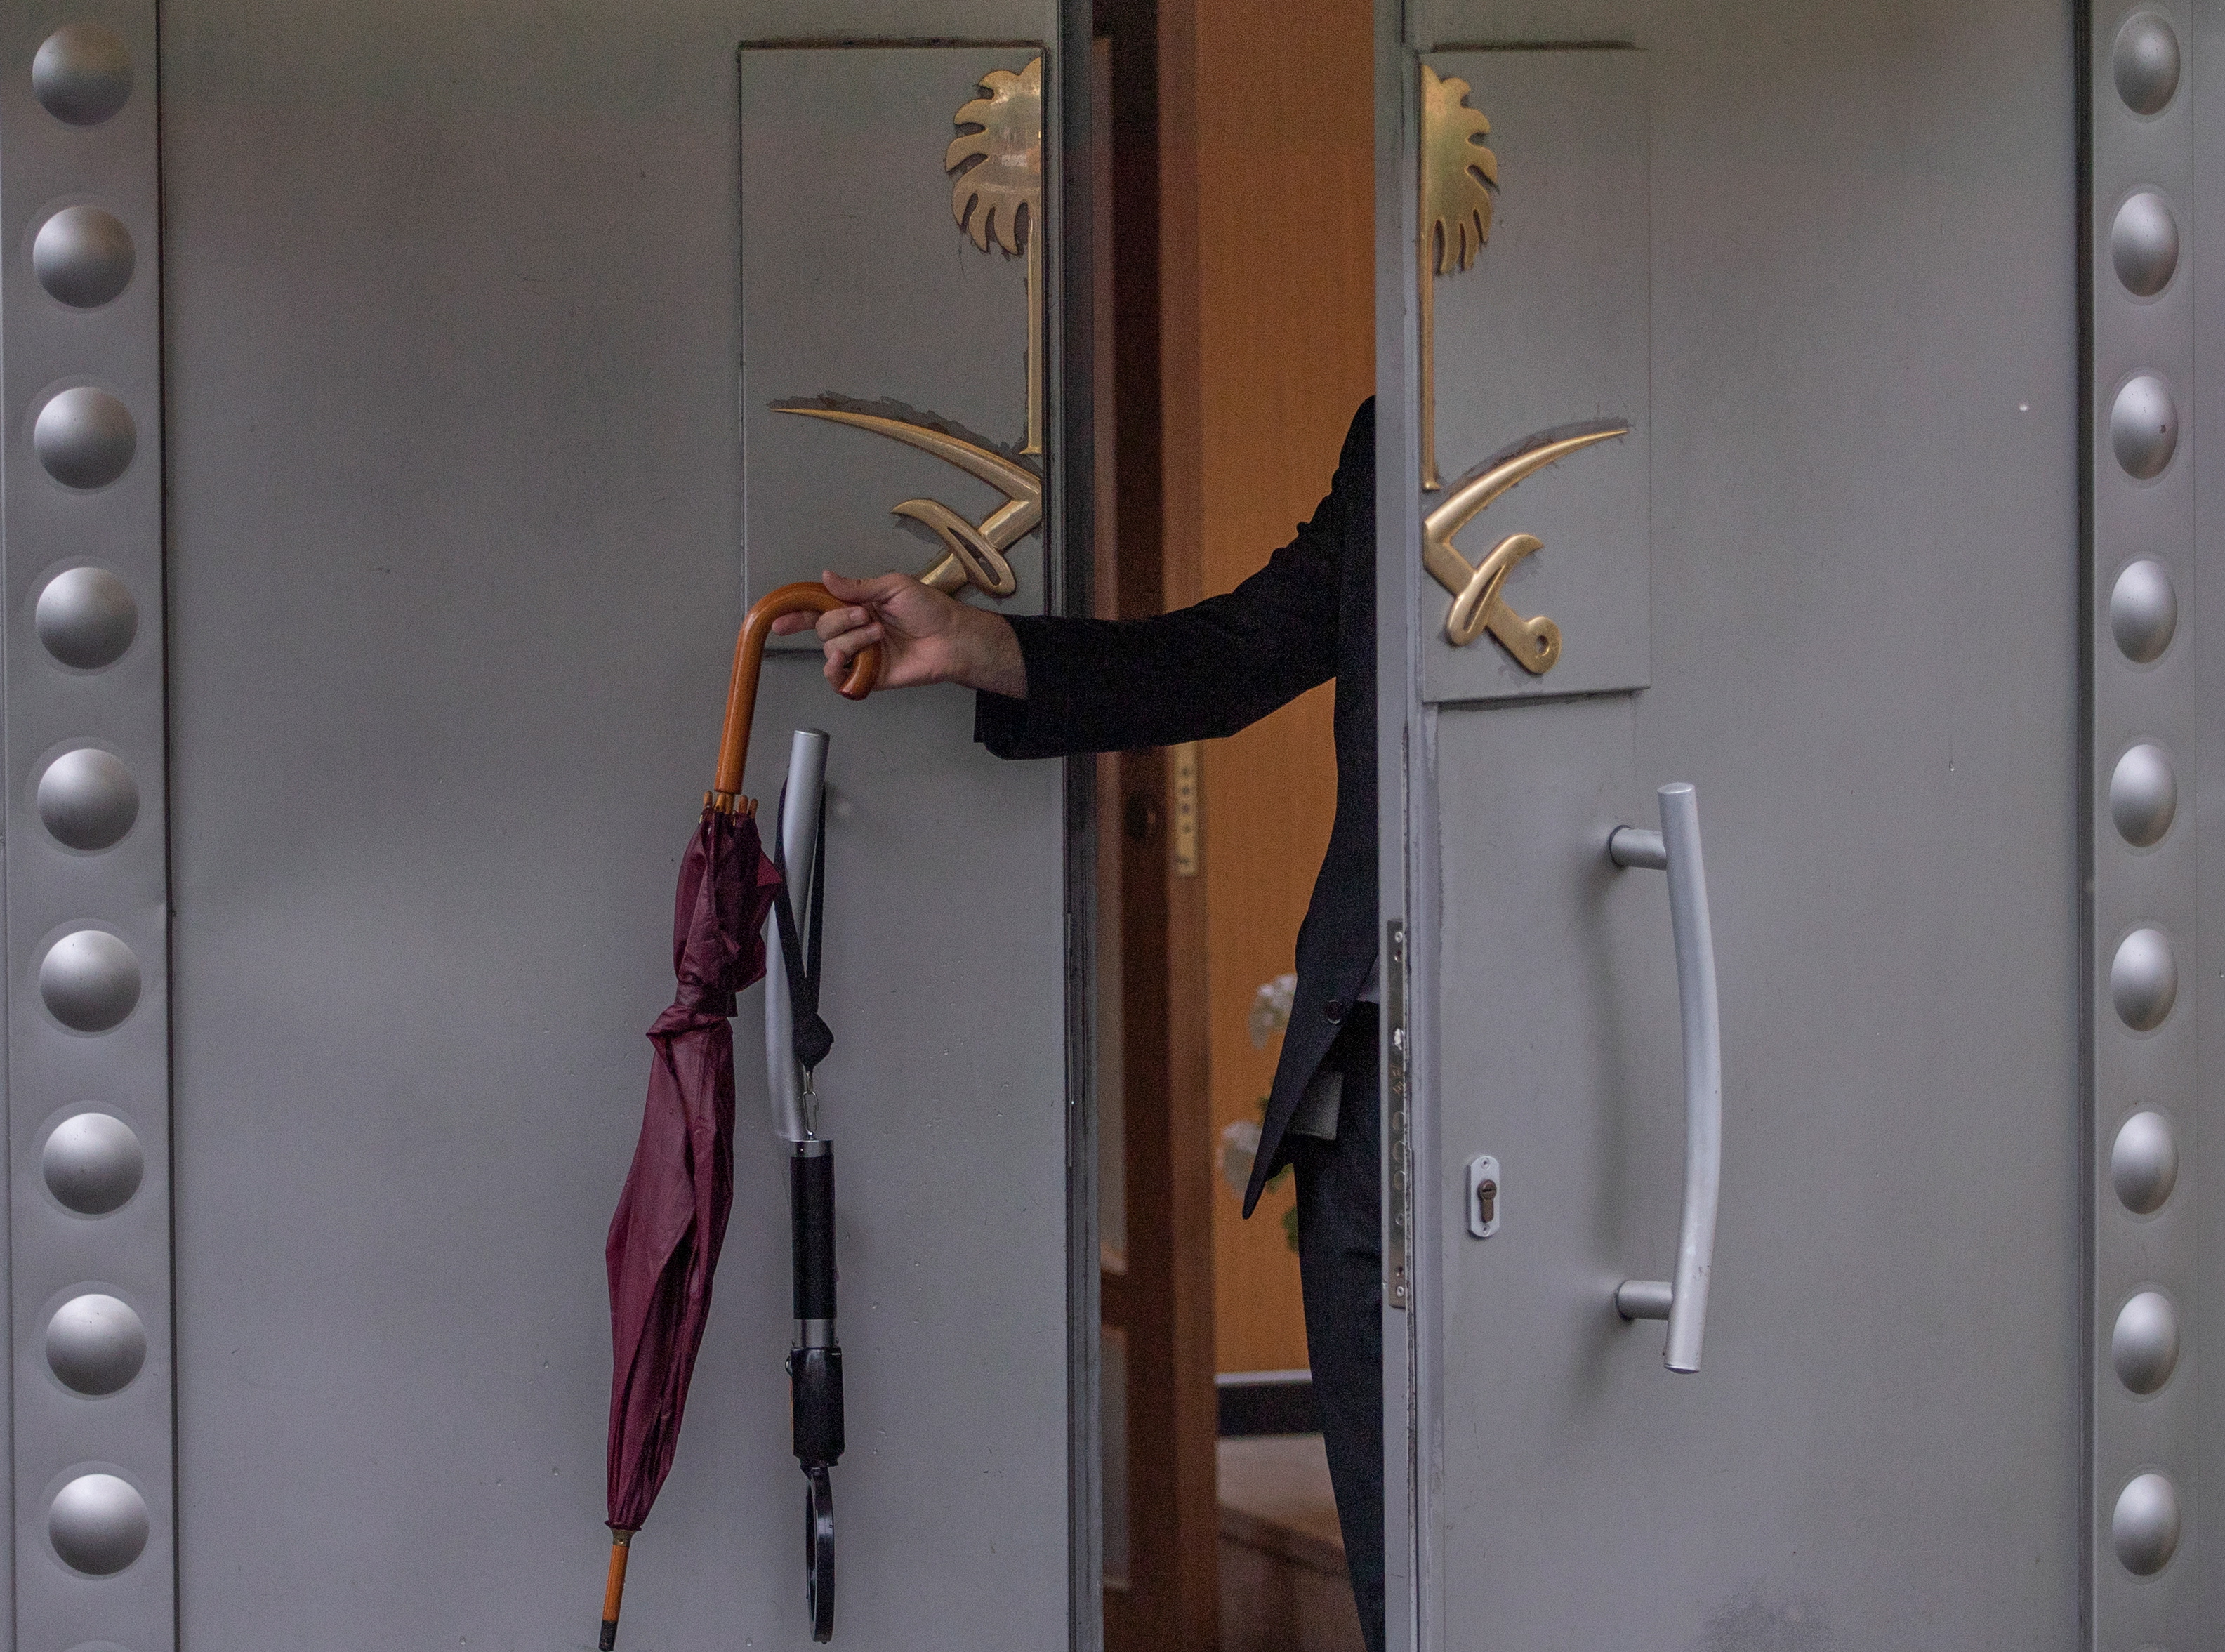 epa07085060 An official hangs an umbrella on a door of the Saudi consulate in Istanbul, Turkey, 11 October 2018. Turkish President Recep Tayyip Erdogan on 07 October said he is following the developments on the disappearance of Saudi journalist Jamal Khashoggi who has gone missing after visiting the Saudi consulate in Istanbul on 02 October to complete routine paperwork.  EPA/SEDAT SUNA